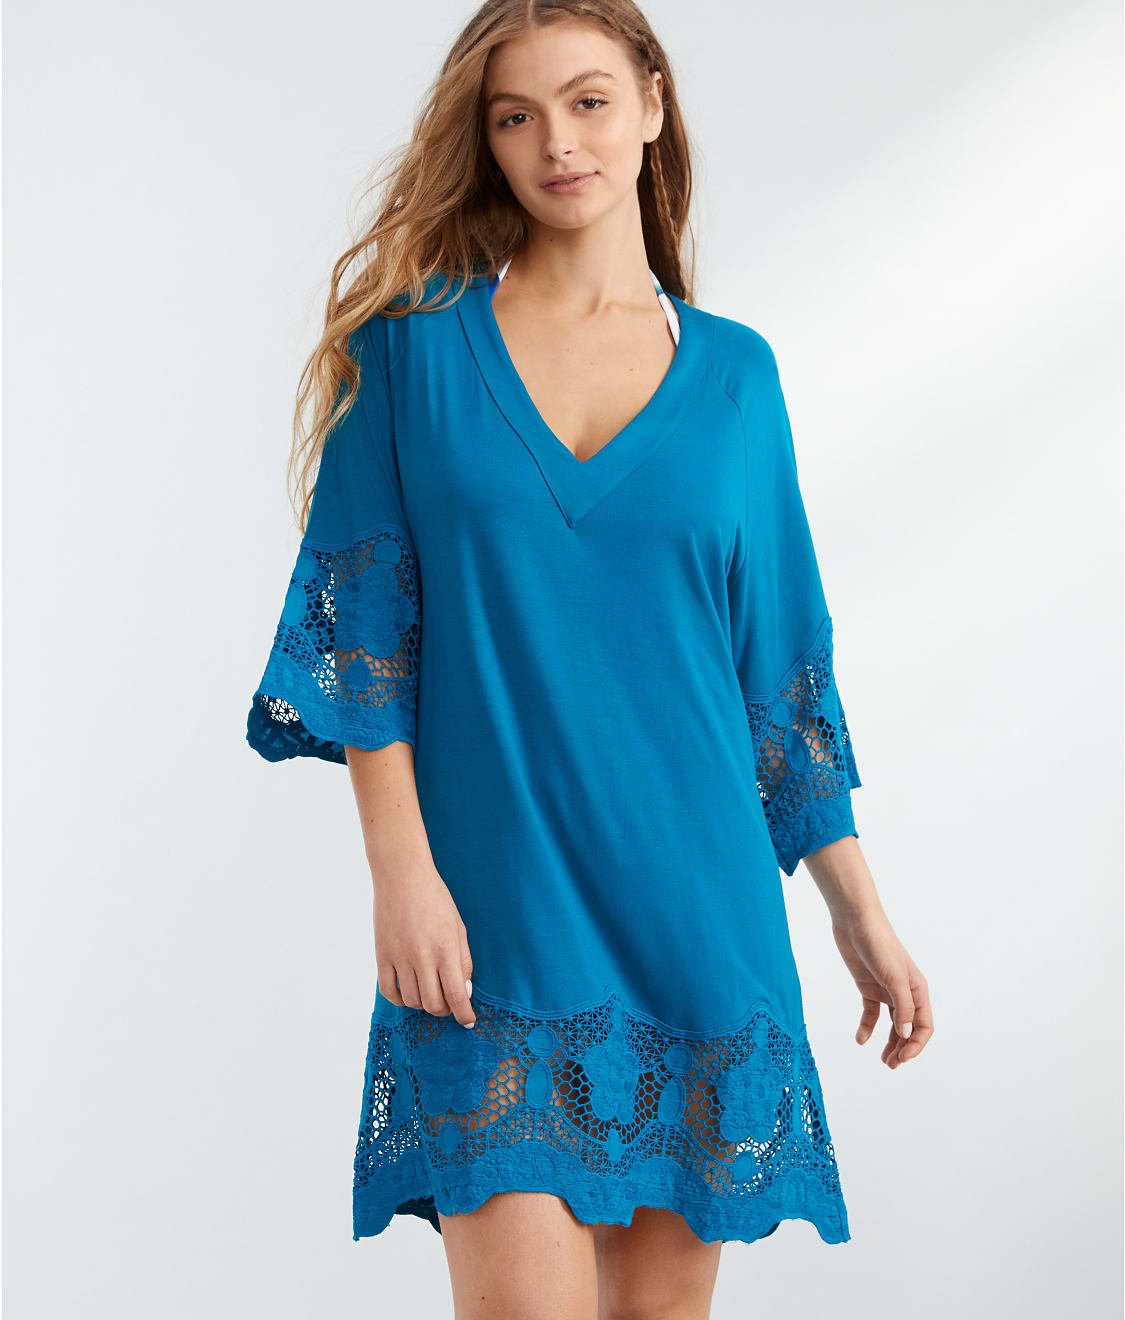 Fantasie: Dione Tunic Cover-Up FS6364